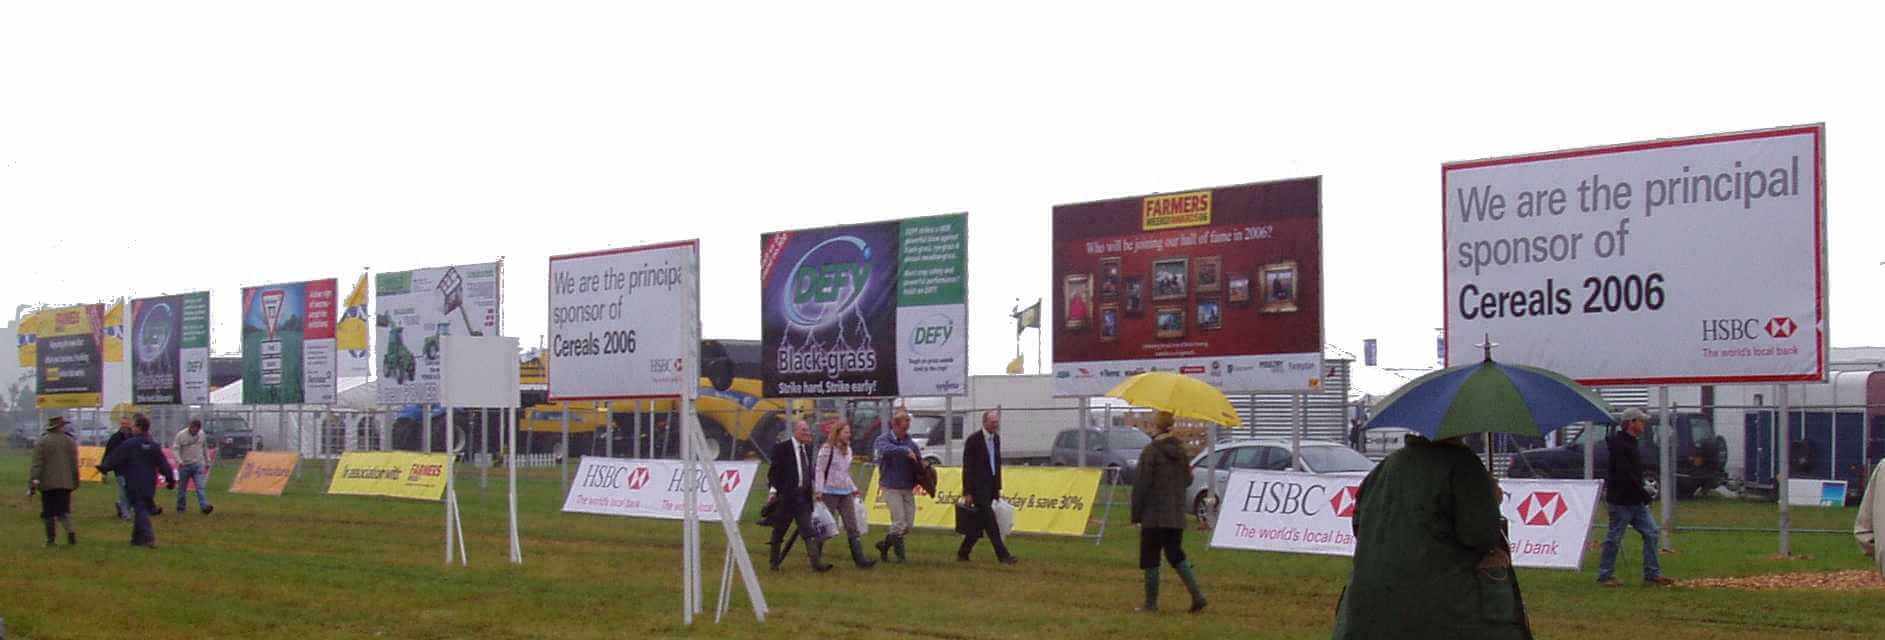 Just some of the many hundreds of signs and advertising boards we print for exhibitions and shows like the Cereals Event